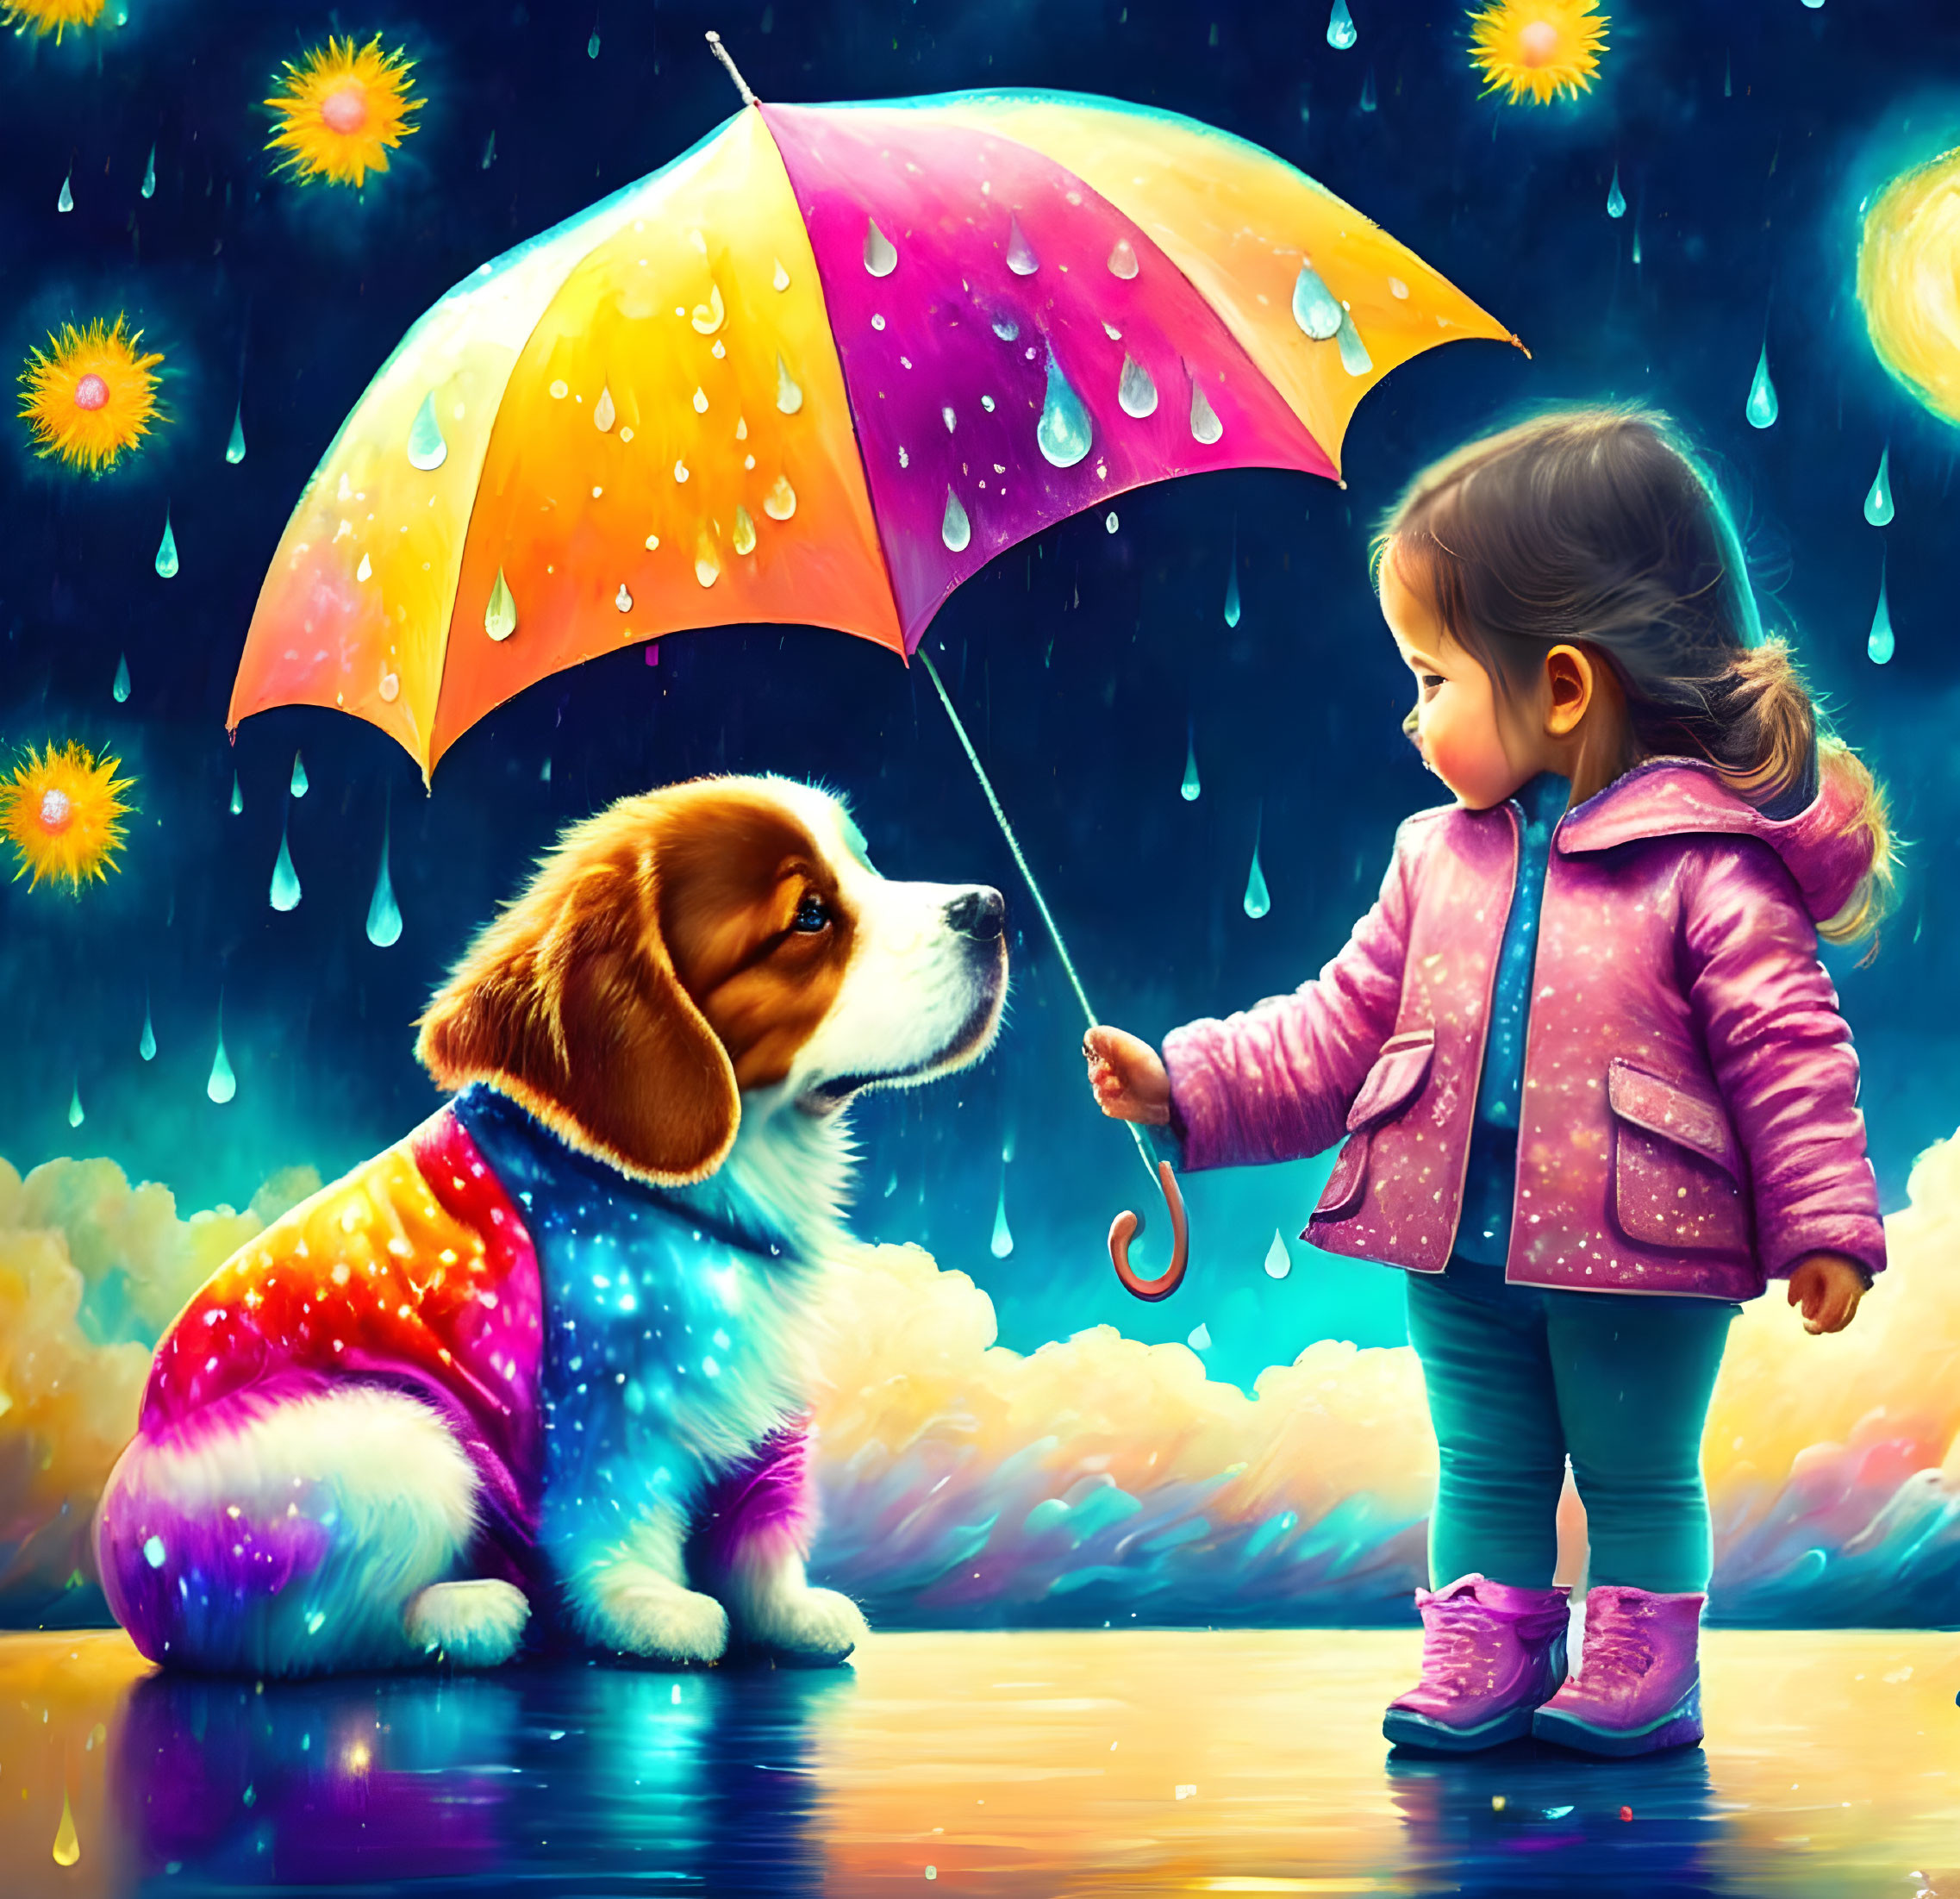 Young girl in pink coat sharing umbrella with dog under starry sky in the rain